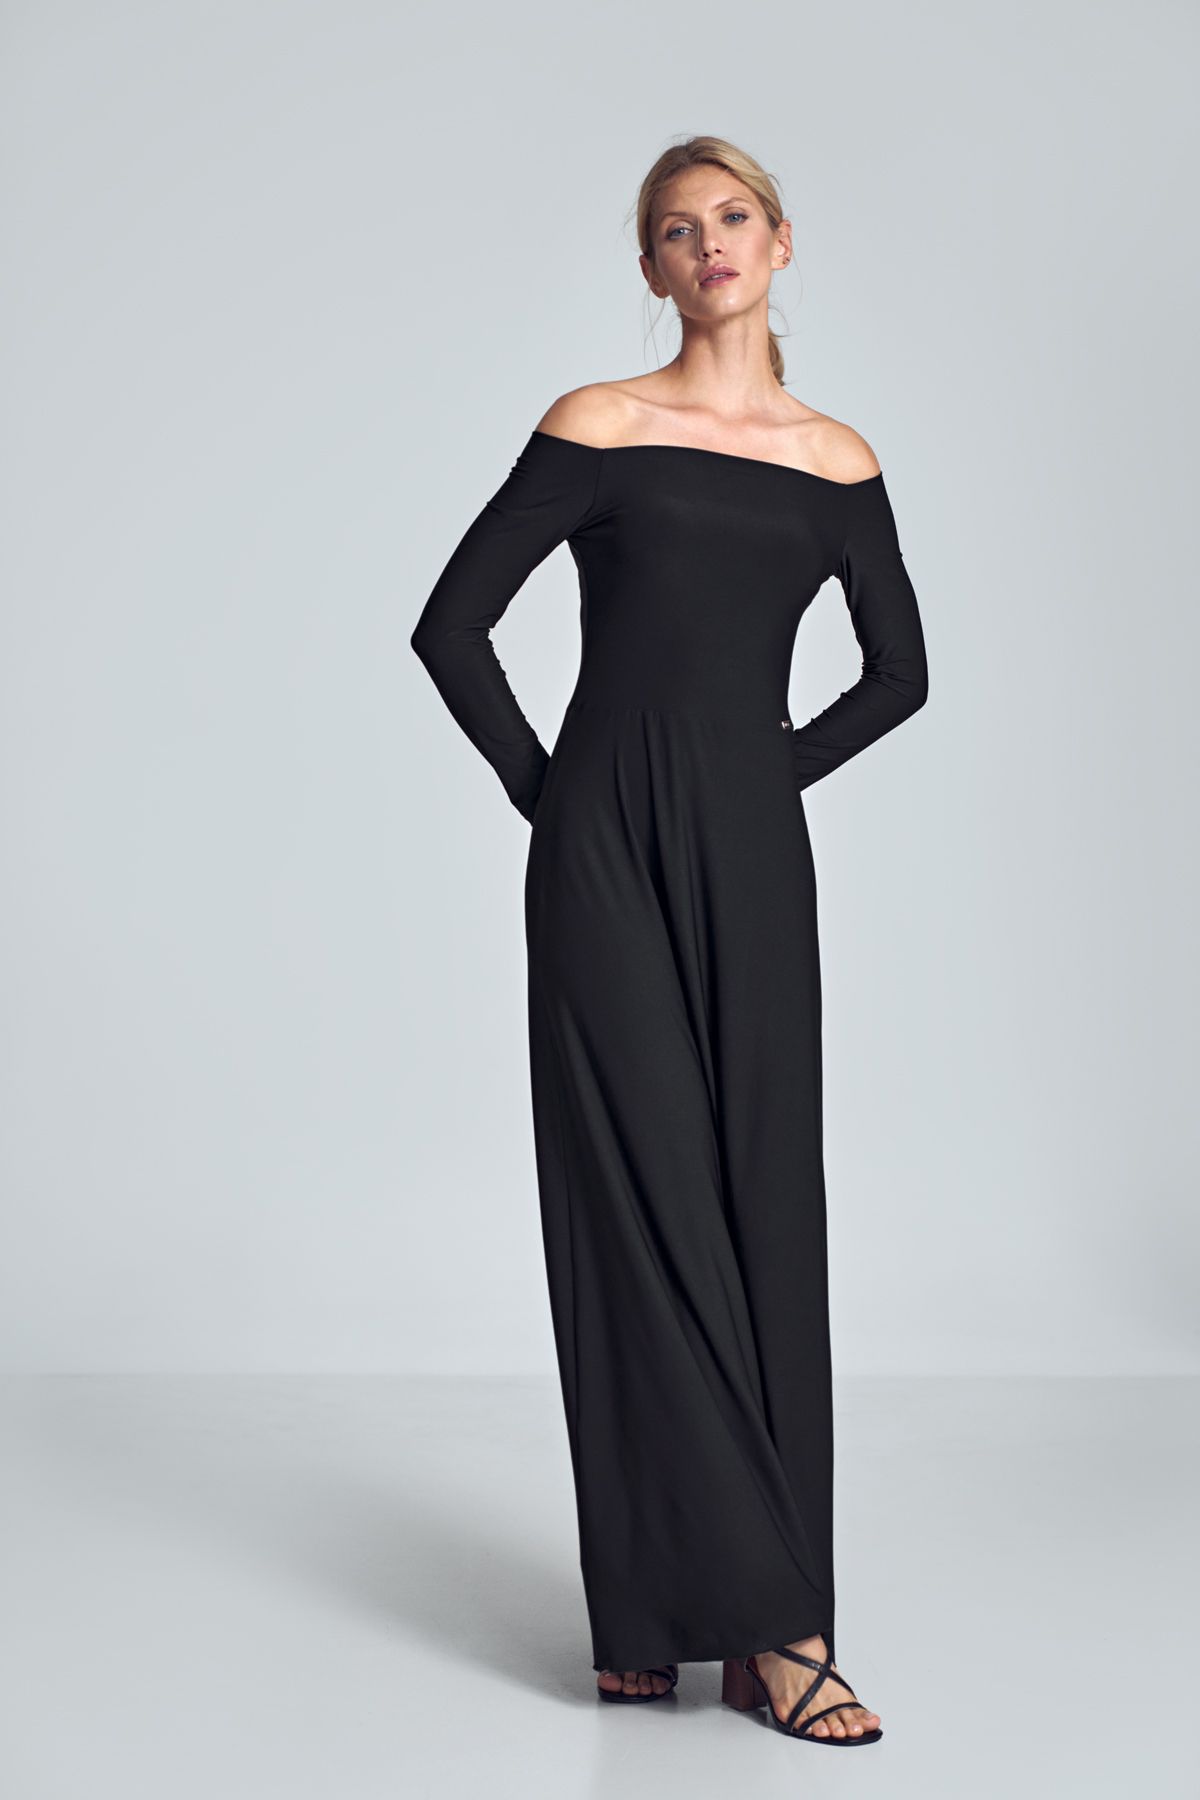 Black sensual maxi dress with long sleeves, large neckline - cold shoulders, pleats at the bust, sewn at the waist.